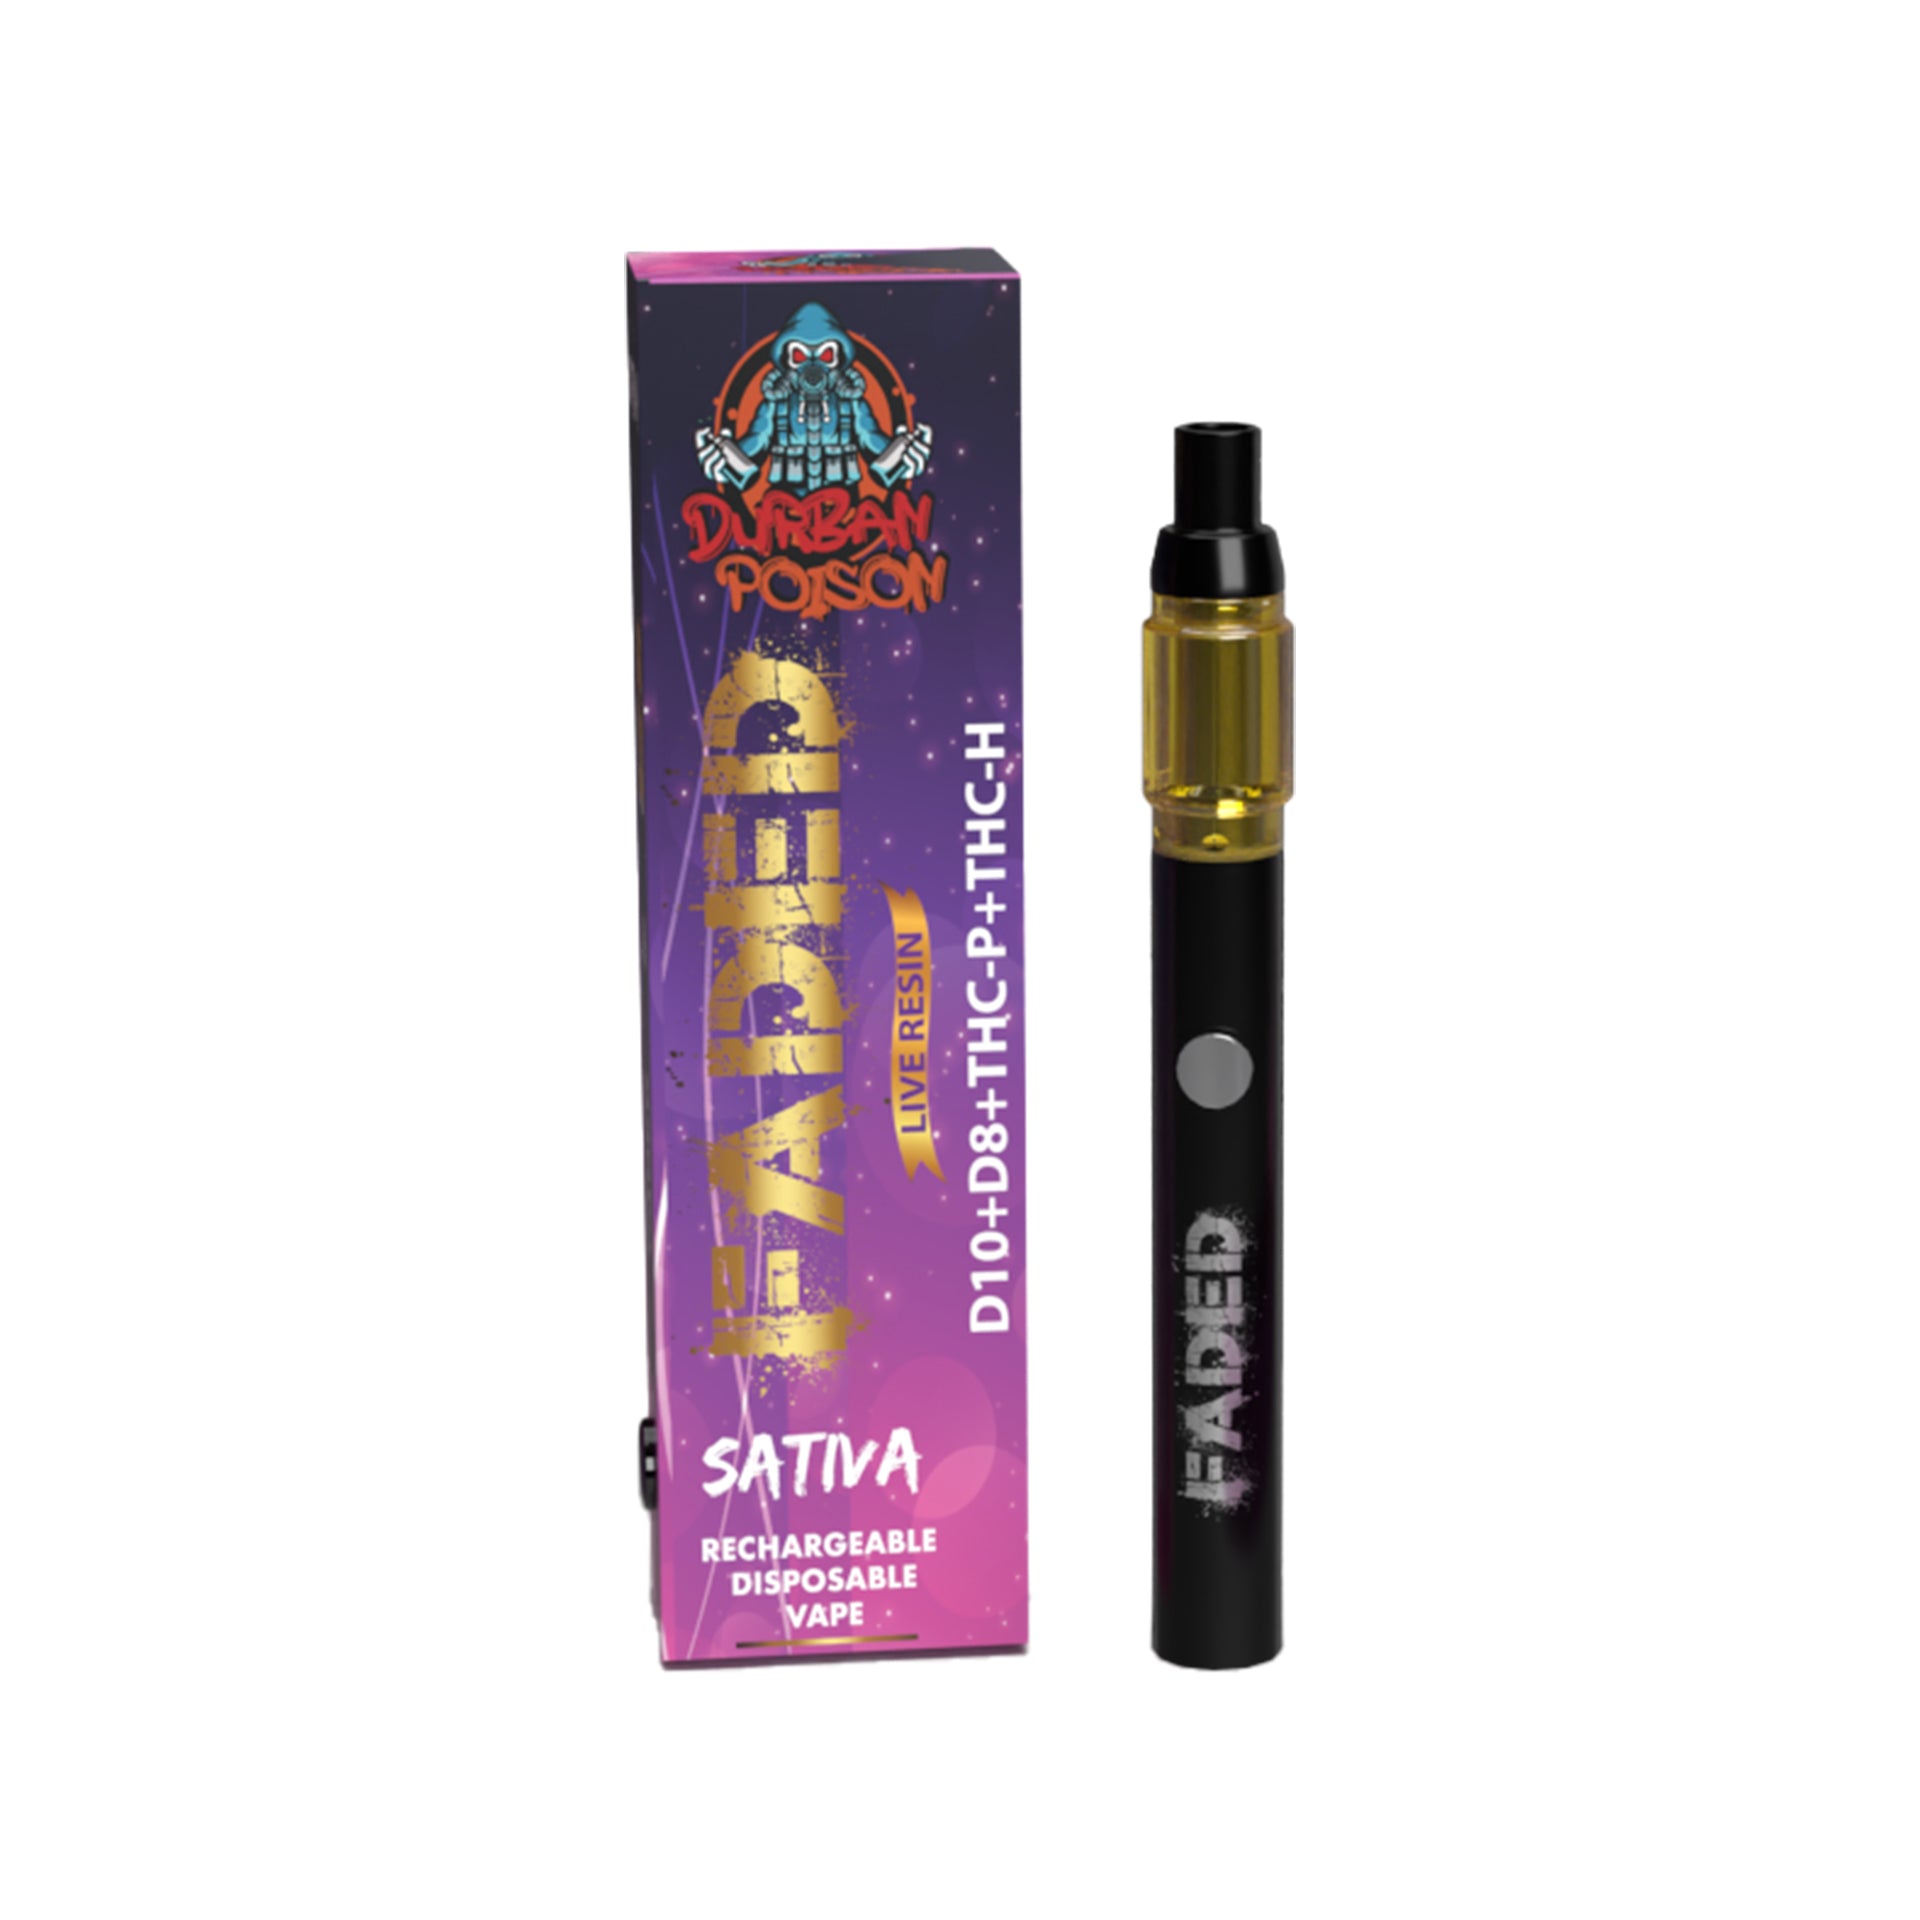 FADED D-10+D-8+THC-P+THC-H LIVE RESIN RECHARGEABLE DISPOSABLE - SATIVA DURBAN POISON 2.5ML